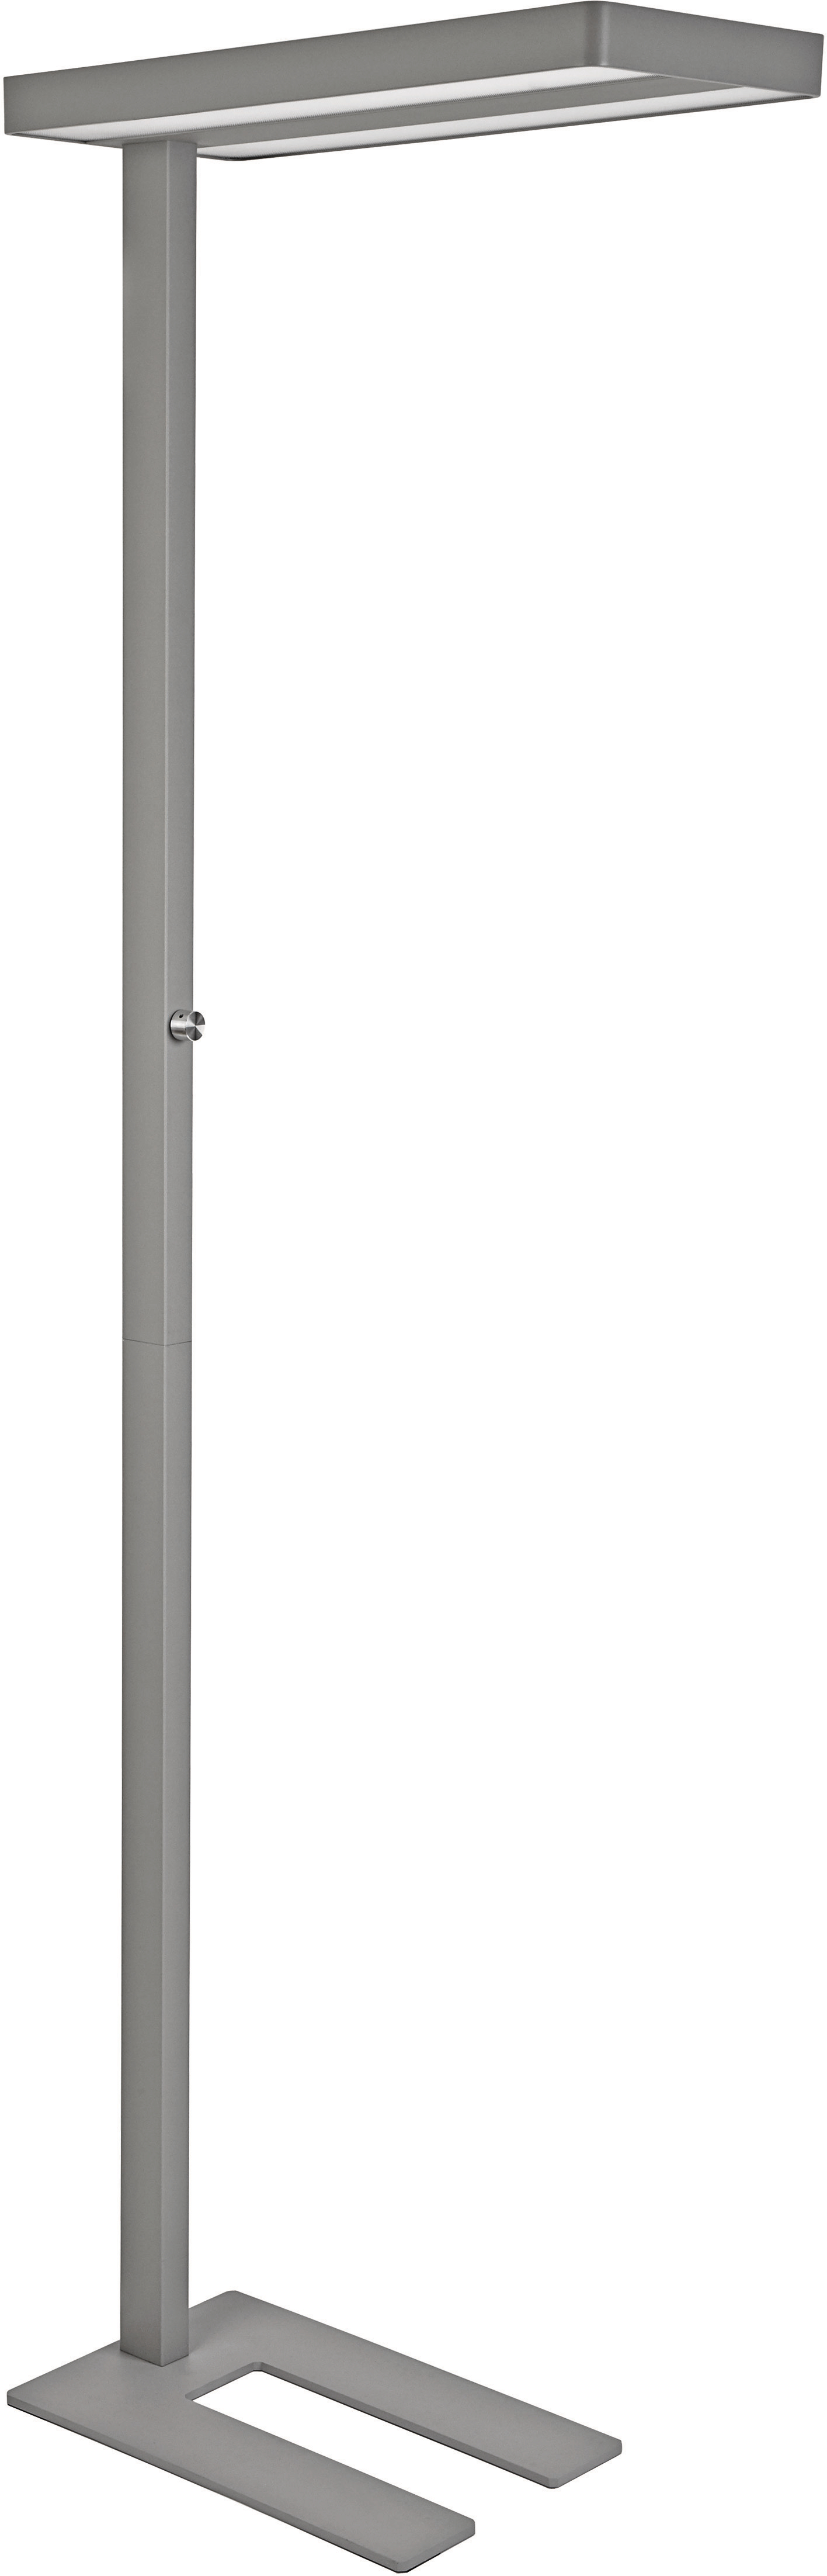 MAUL Lampadaire LED MAULjaval 8258495 dimmable, argent